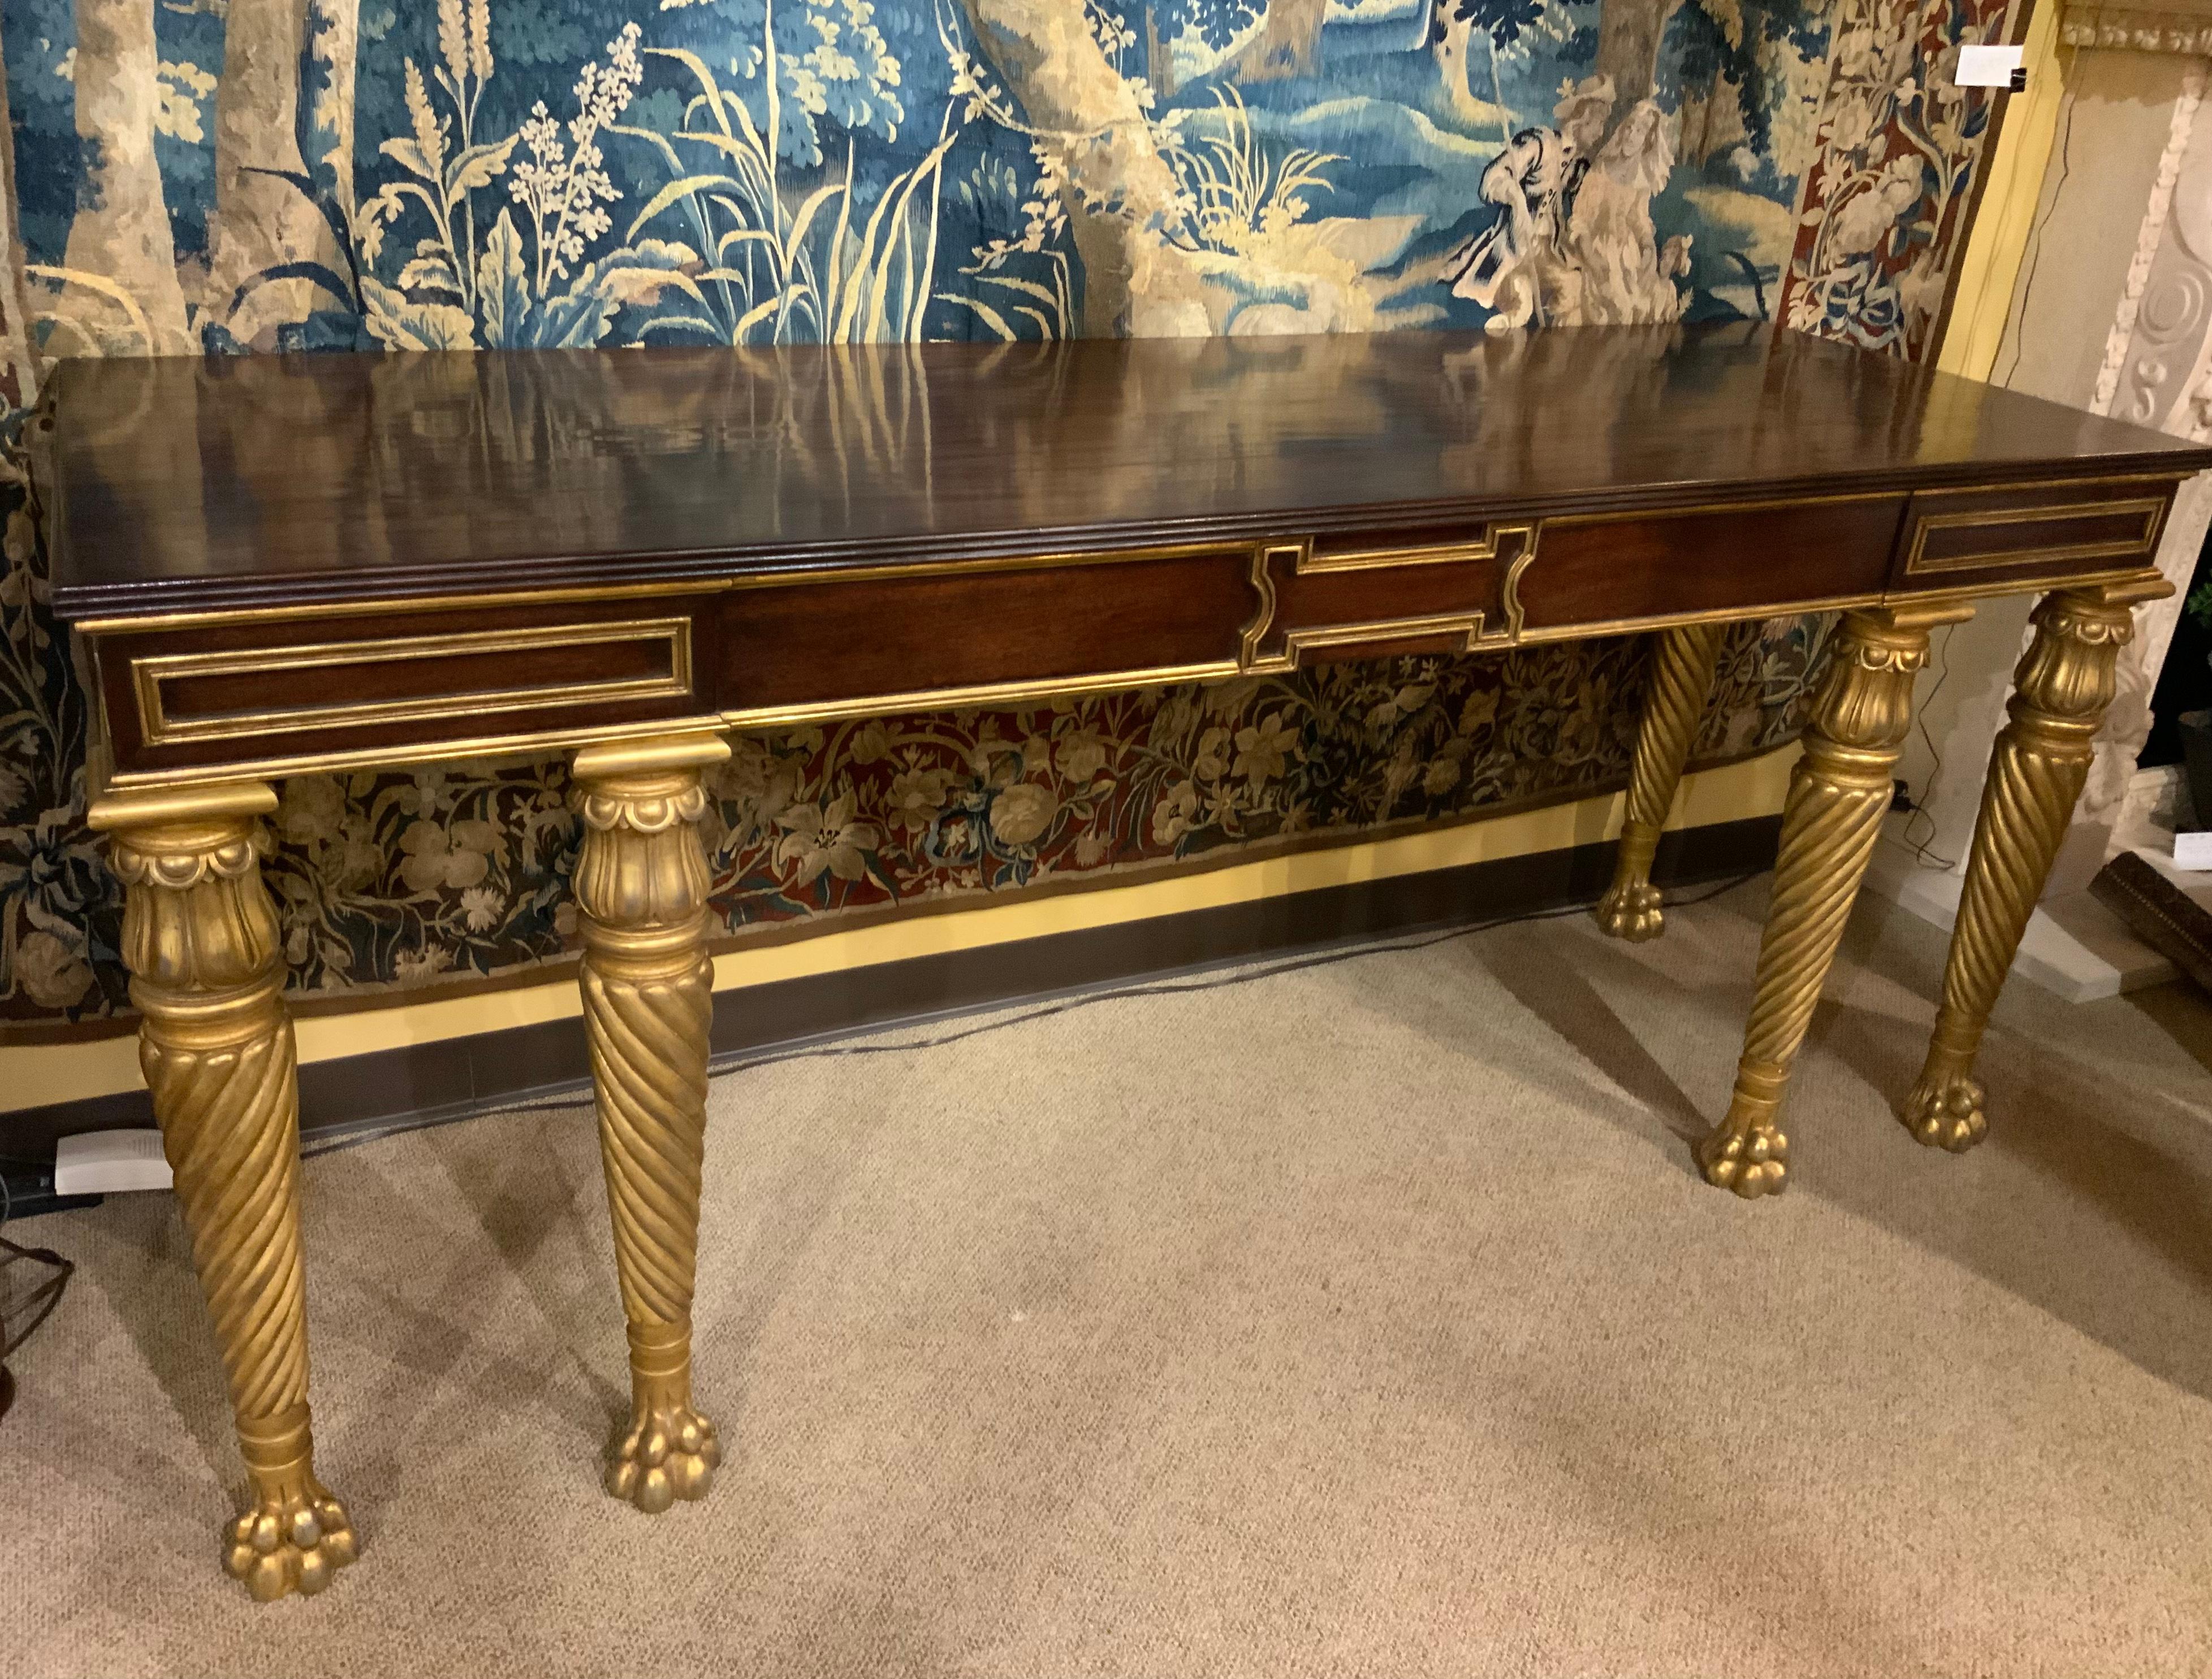 Mahogany Console with Gilt Carved Legs and Designs in Neoclassical Taste For Sale 2